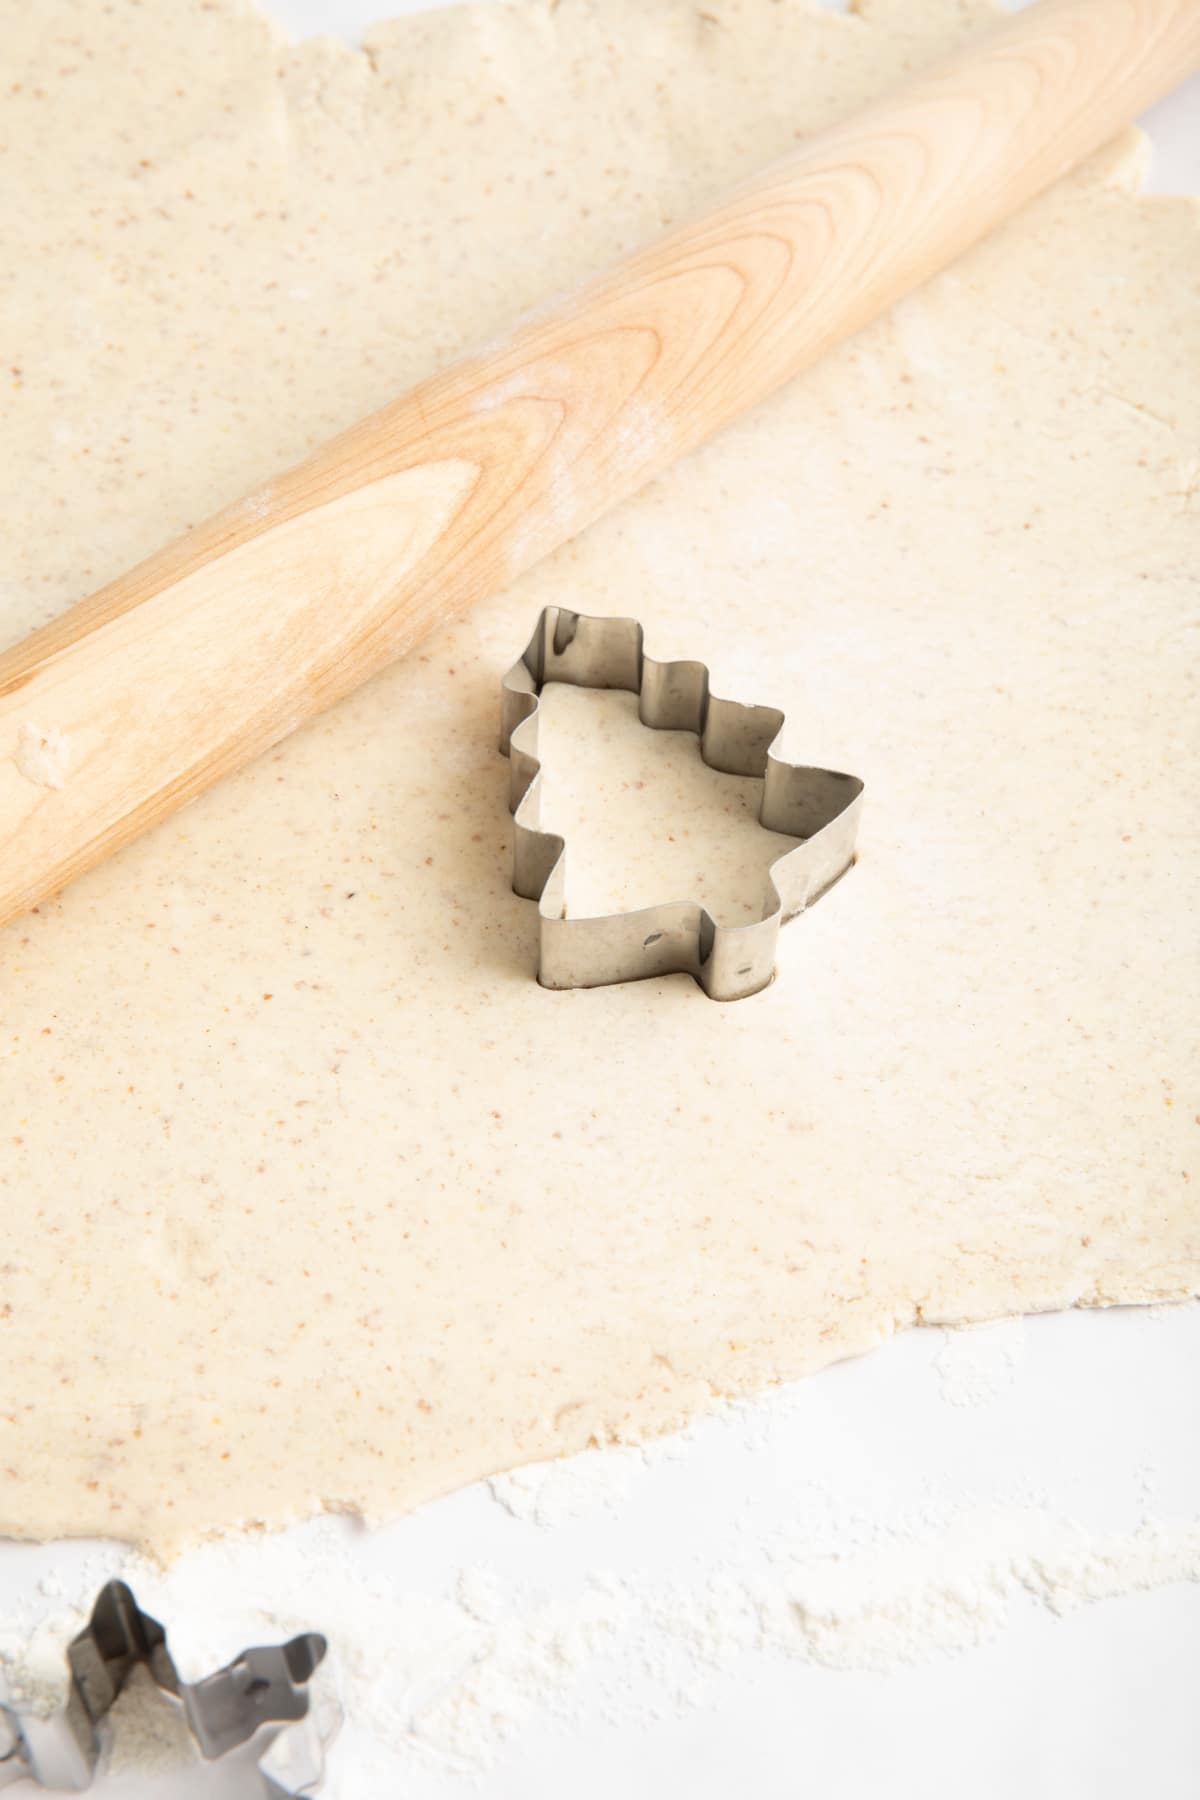 Sugar cookie dough rolled out on a floured white surface. A light wood rolling pin and a Christmas tree shaped cookie cutter sit on the dough. A snowflake cookie cutter sits just off to the side of the cookie dough.